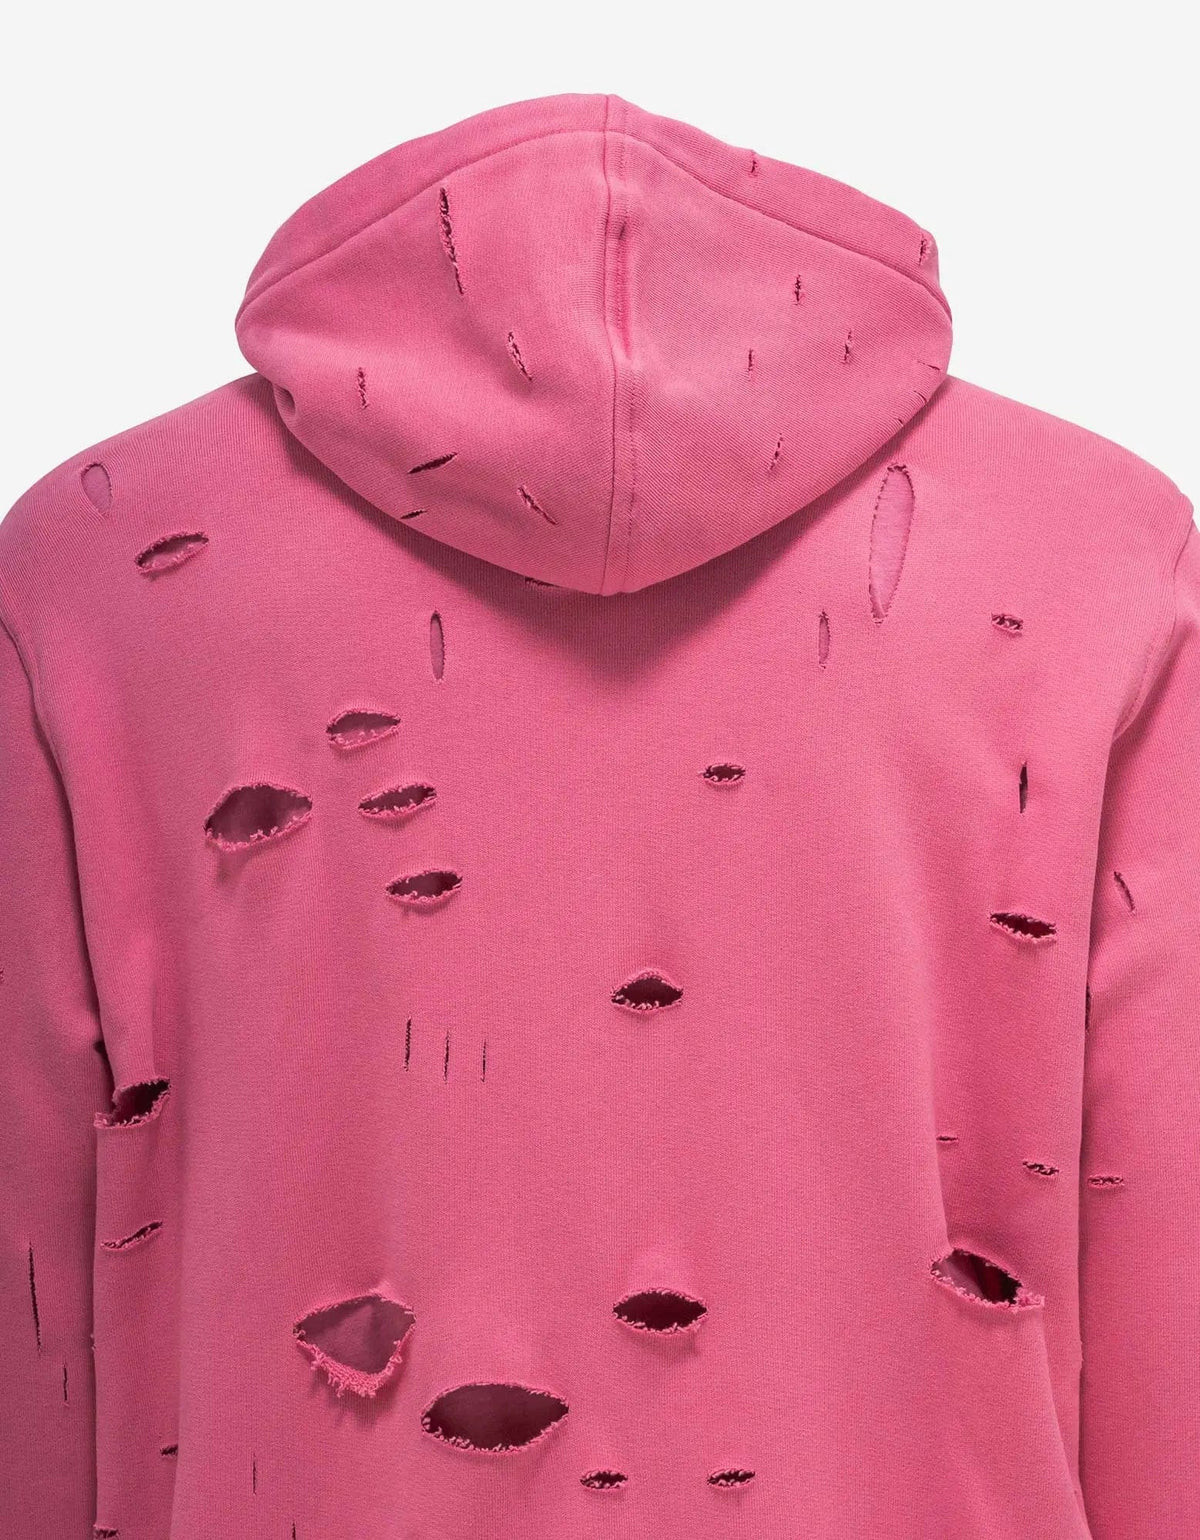 Givenchy Pink Archetype Logo Destroyed Hoodie